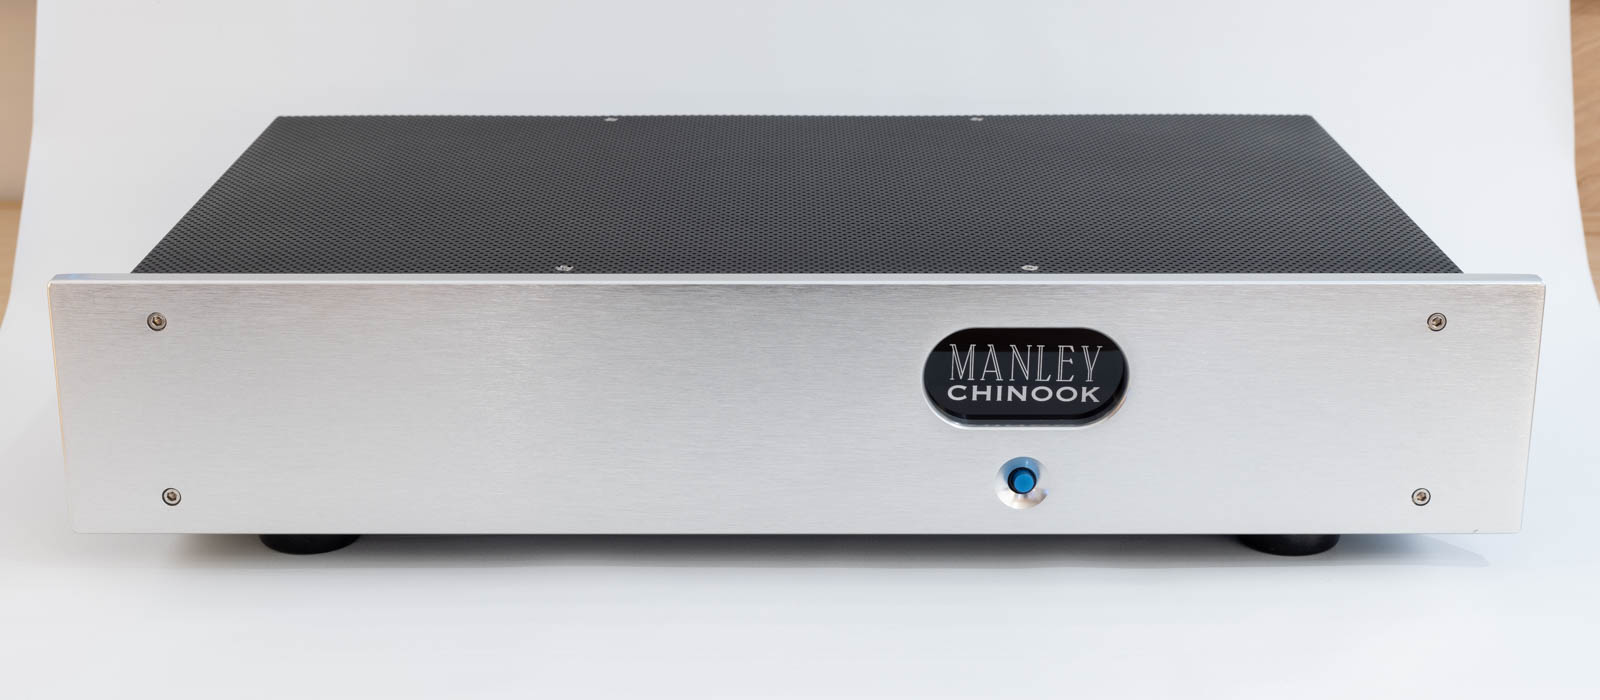 Post image for Manley Chinook Special Edition MkII Tube Phonostage Review